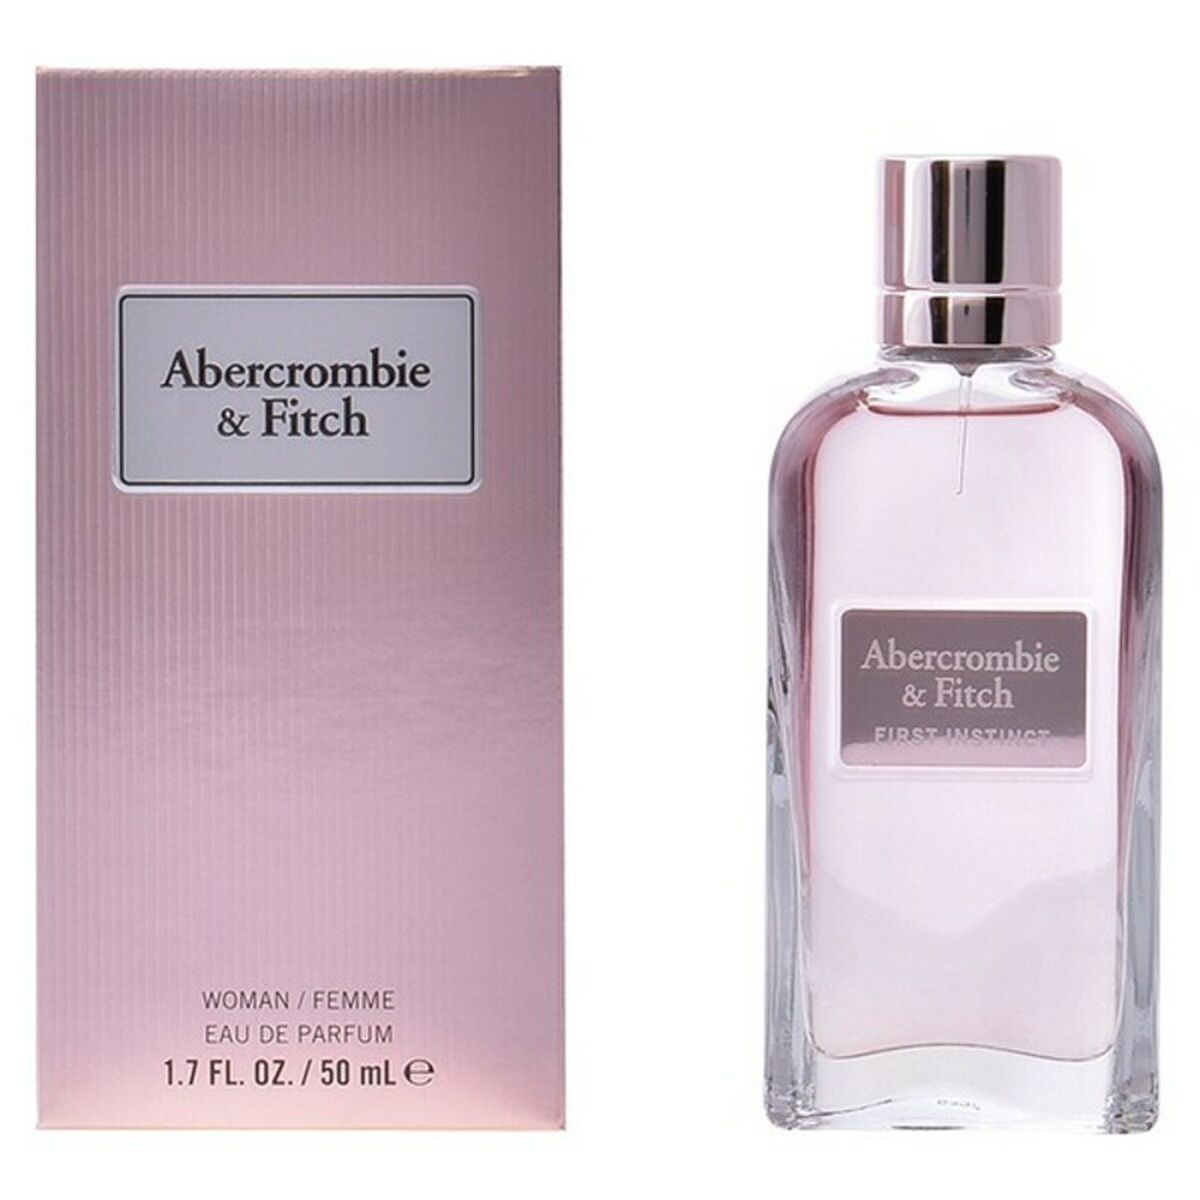 Dame parfyme First Instinct Abercrombie & Fitch EDP